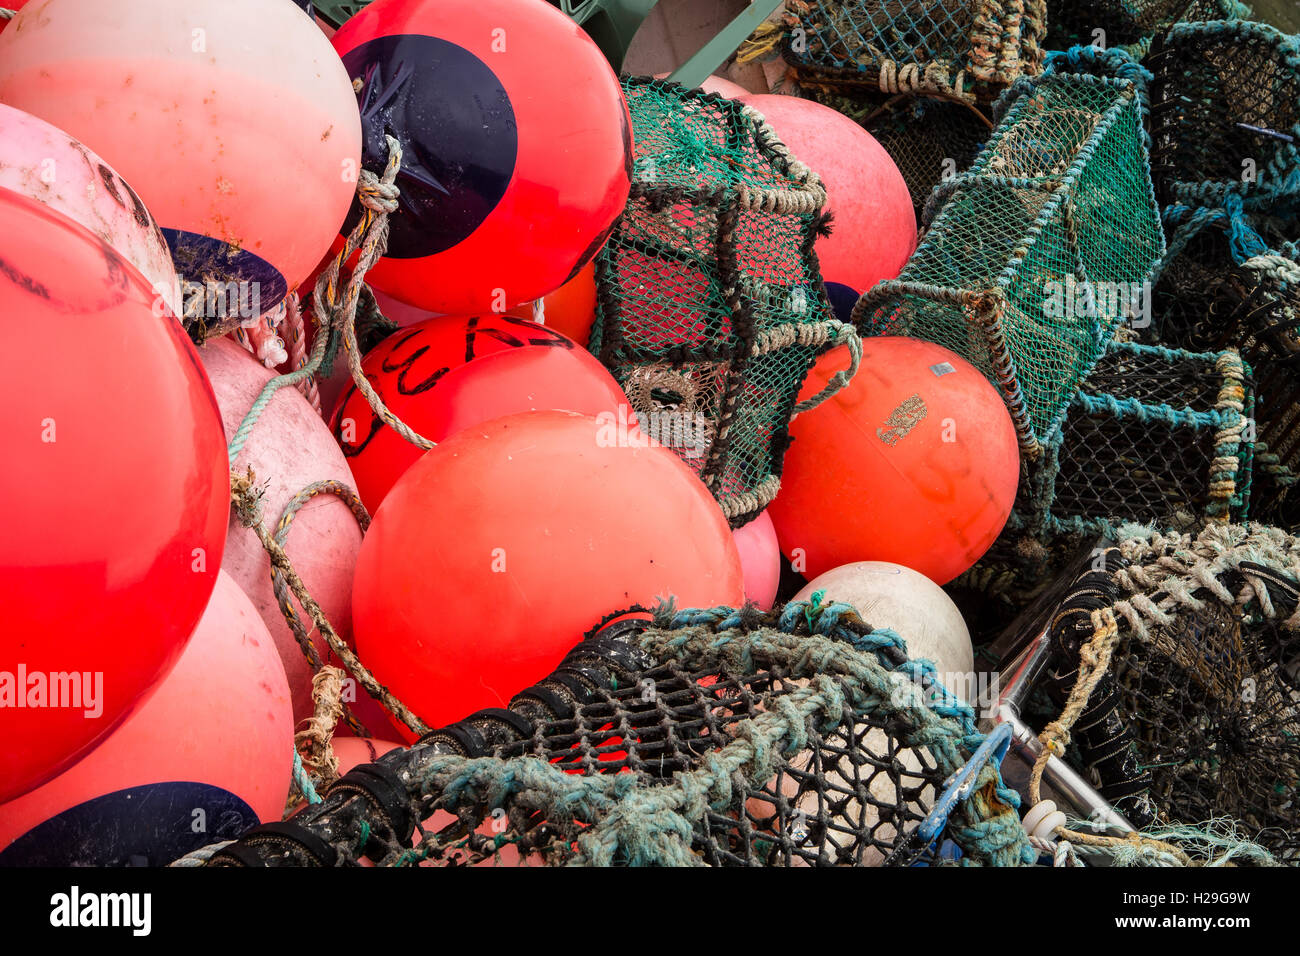 a tangled heap of bright orange/red fishing floats and creels Stock Photo